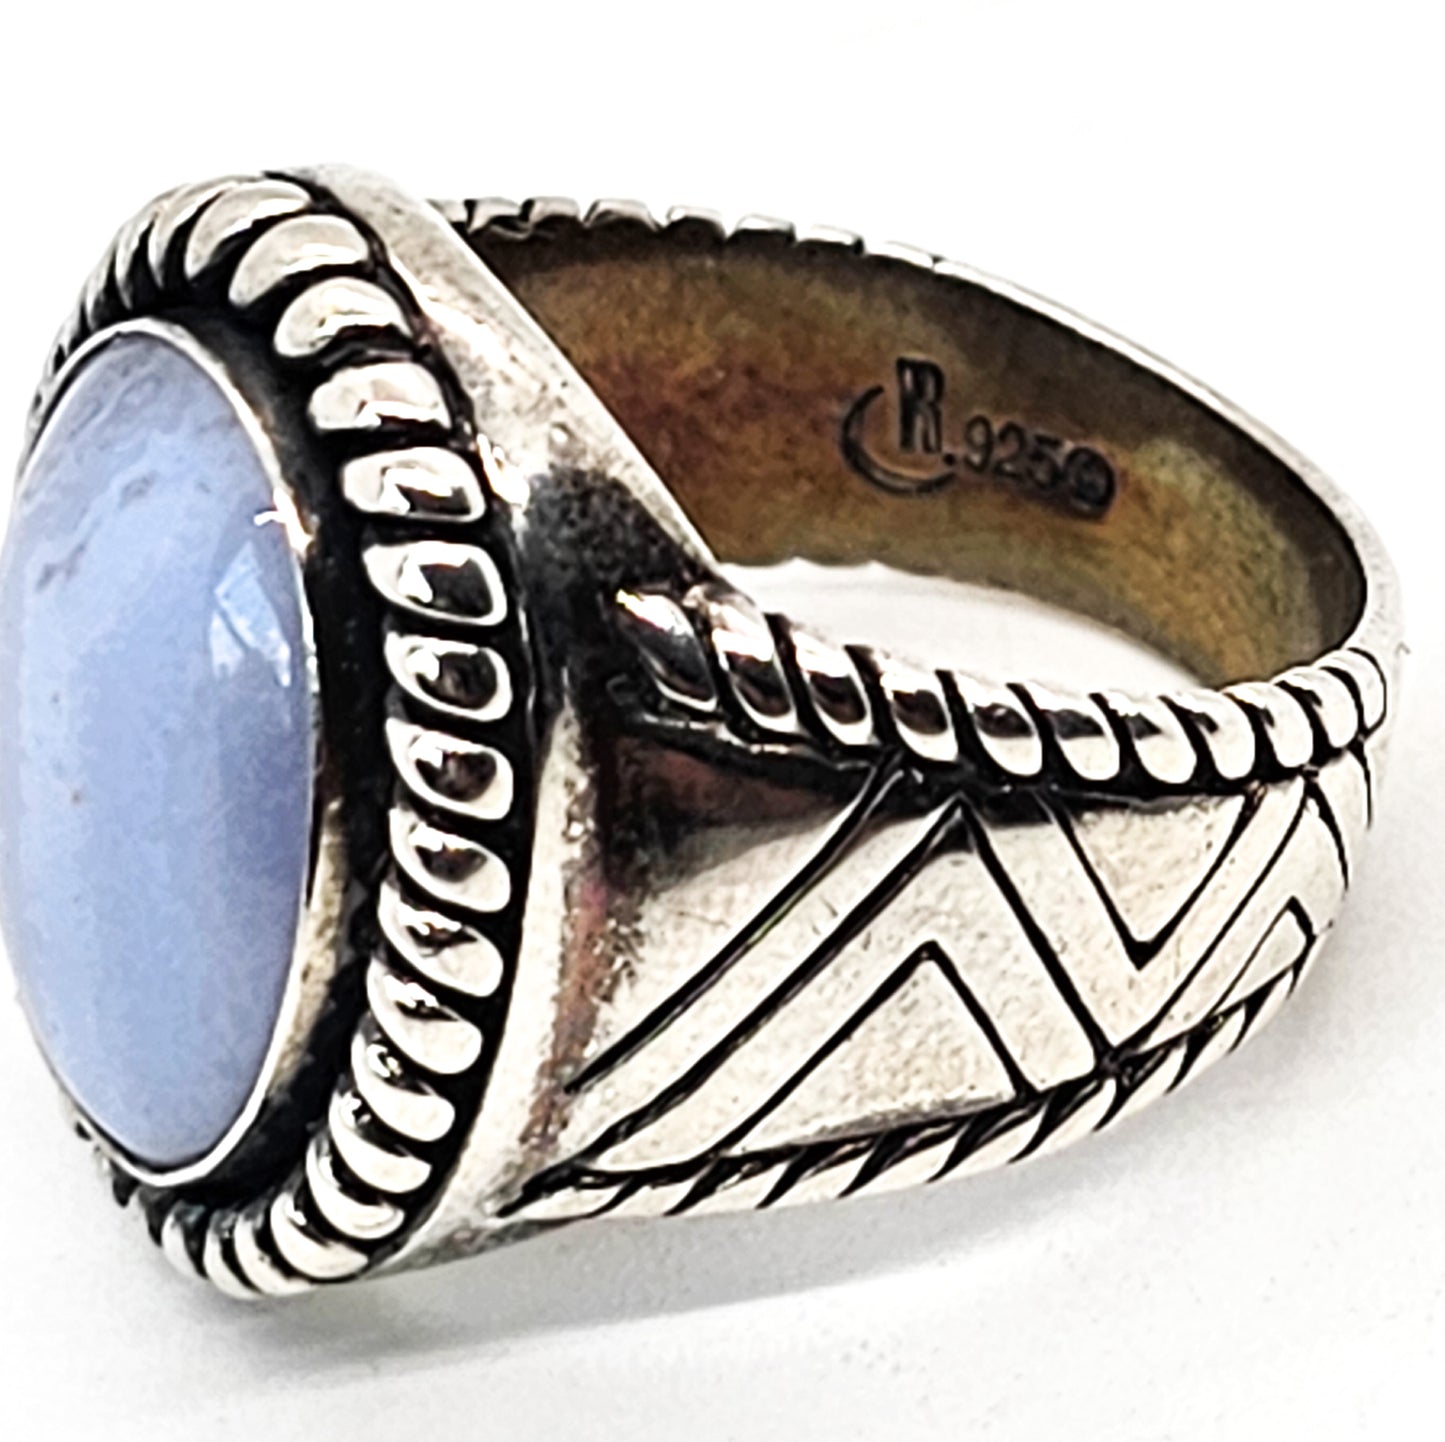 Relios Carolyn Pollack Blue Lace Agate gemstone sterling silver ring size 8.5